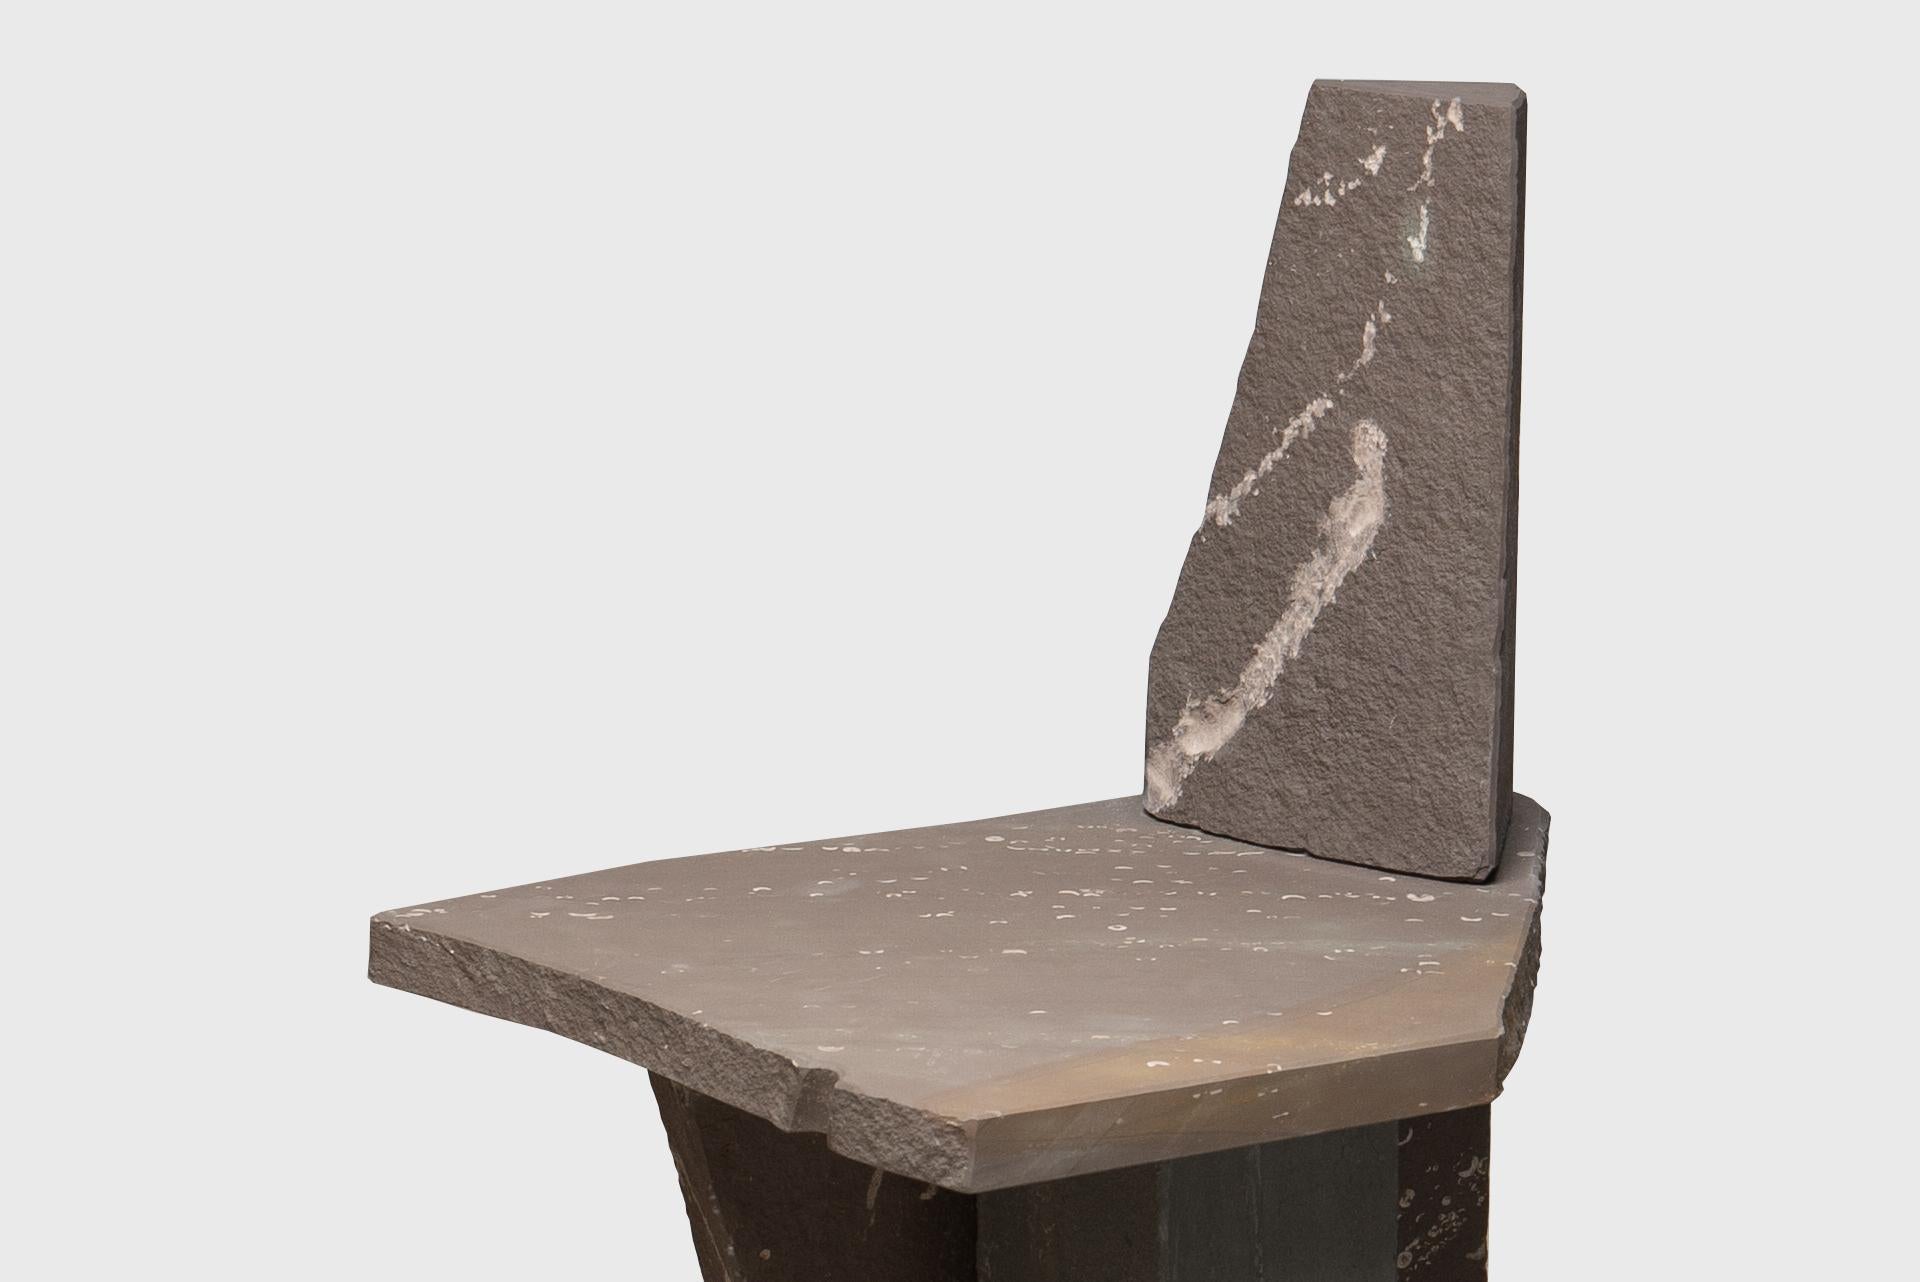 Contemporary Natural Chair 13, Graywacke Offcut Gray Stone, Carsten in der Elst For Sale 3